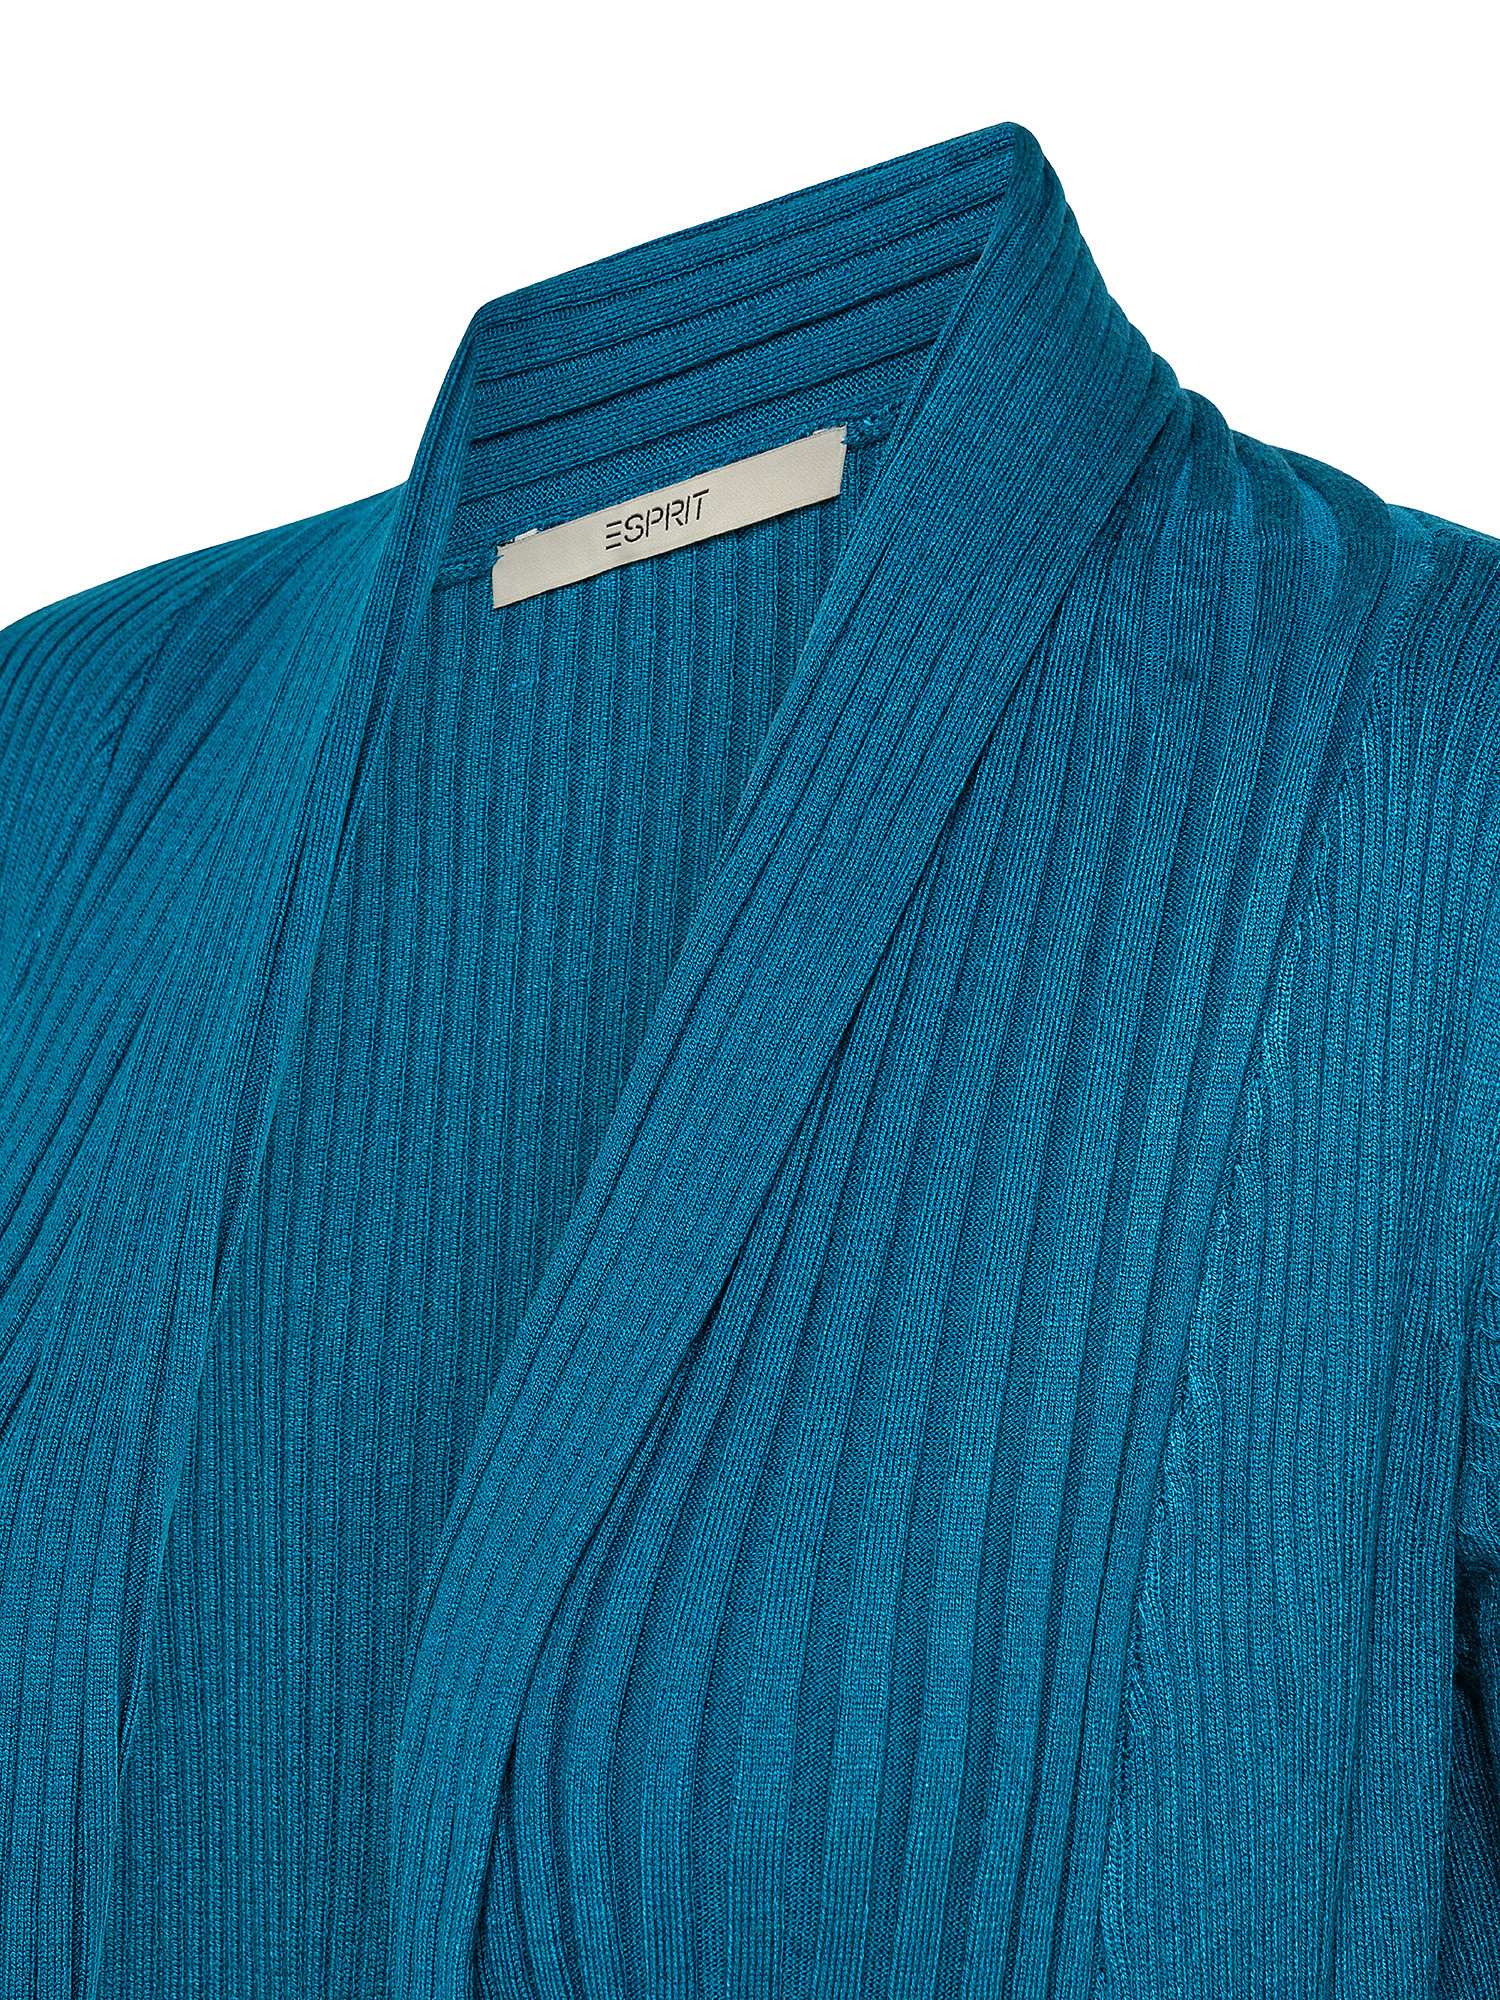 Open ribbed cardigan, Turquoise, large image number 2